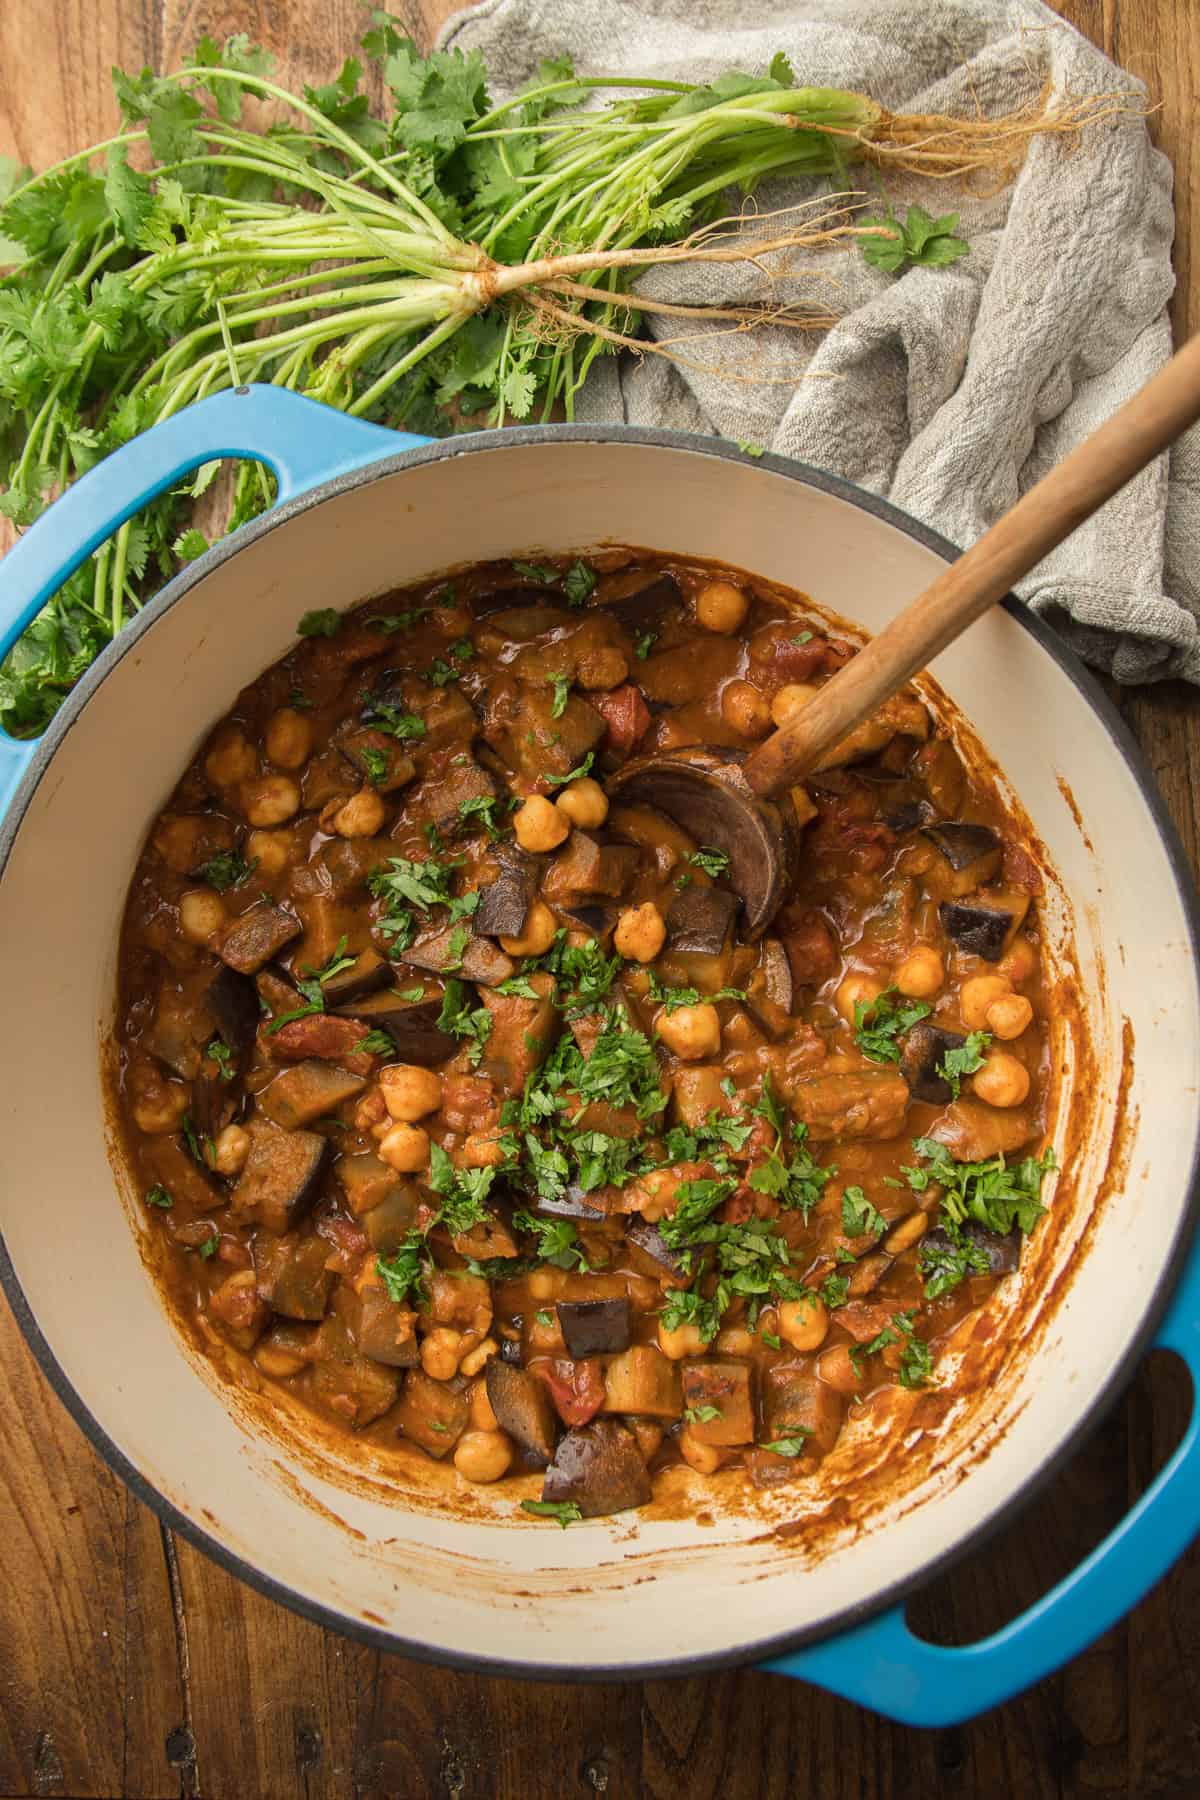 Pot of Eggplant Curry with a Wooden Spoon